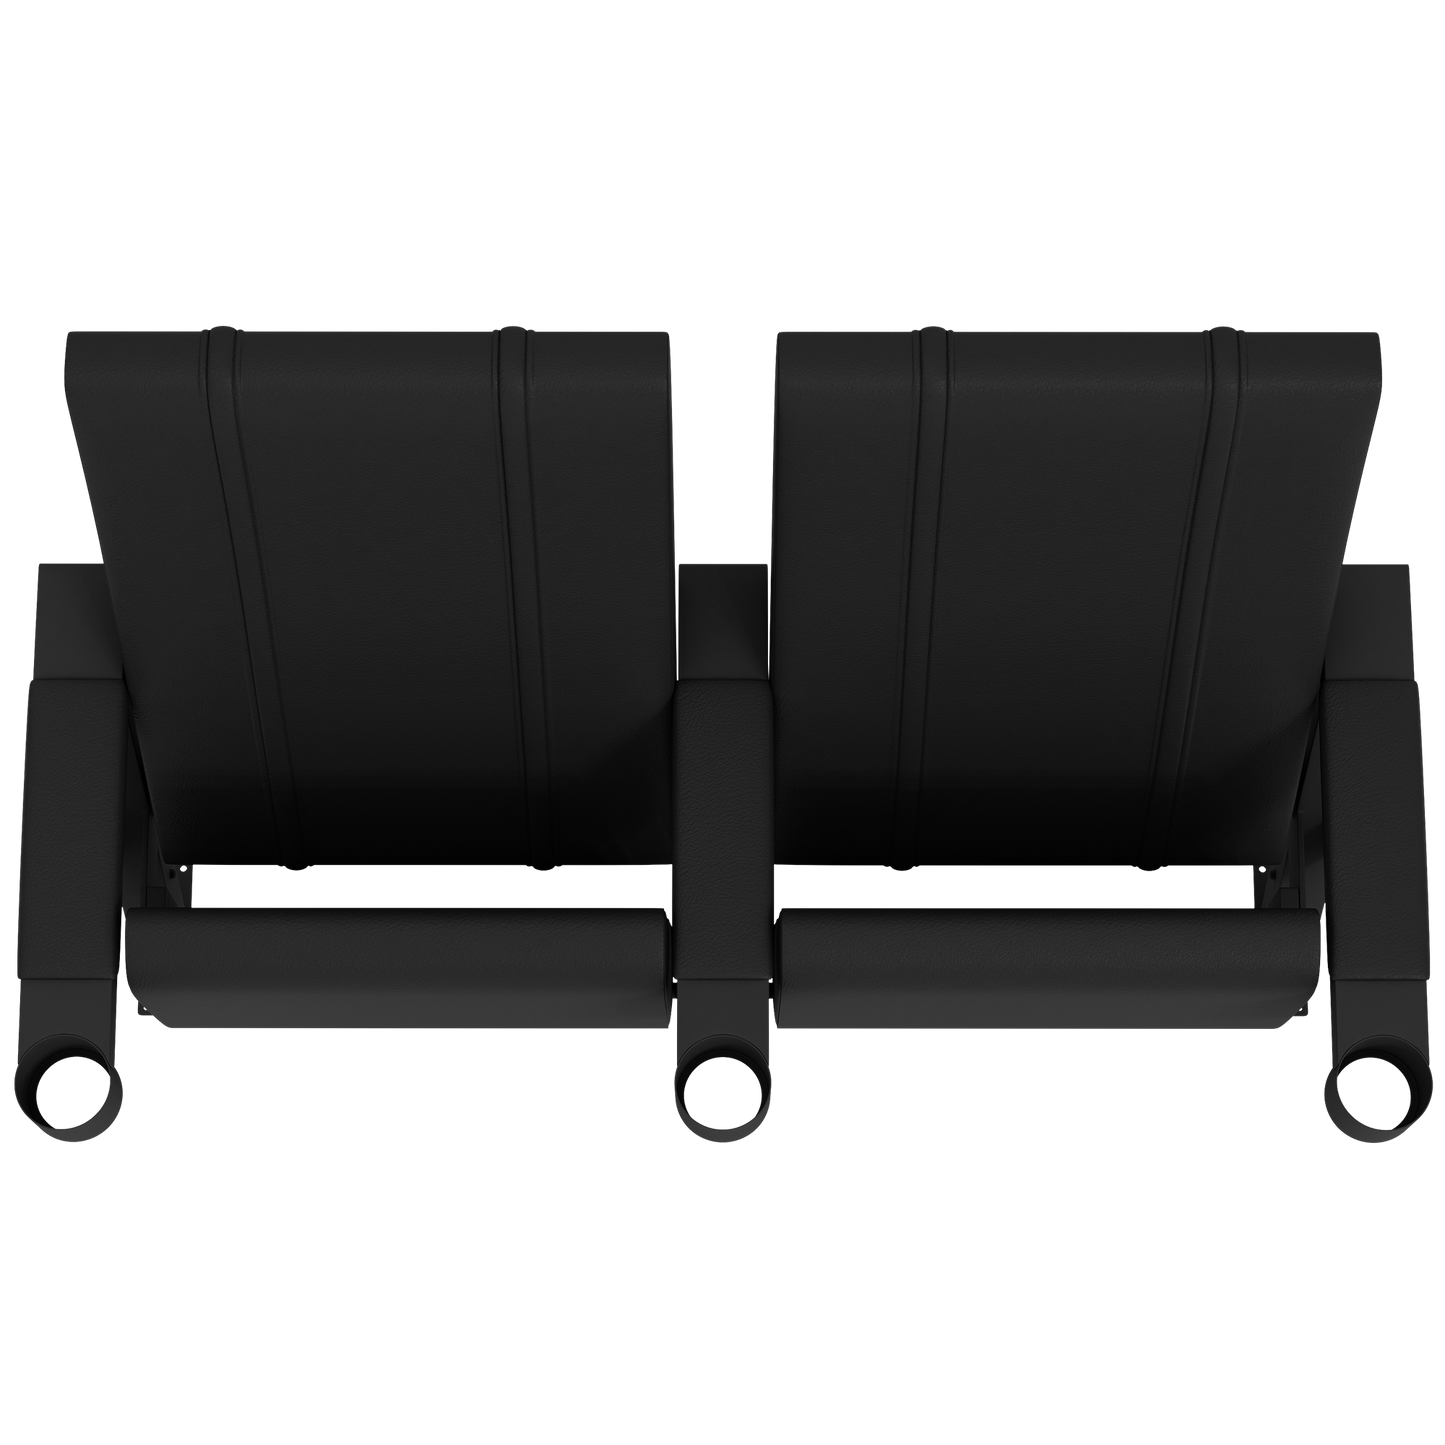 SuiteMax 3.5 VIP Seats with Georgia Southern University Logo